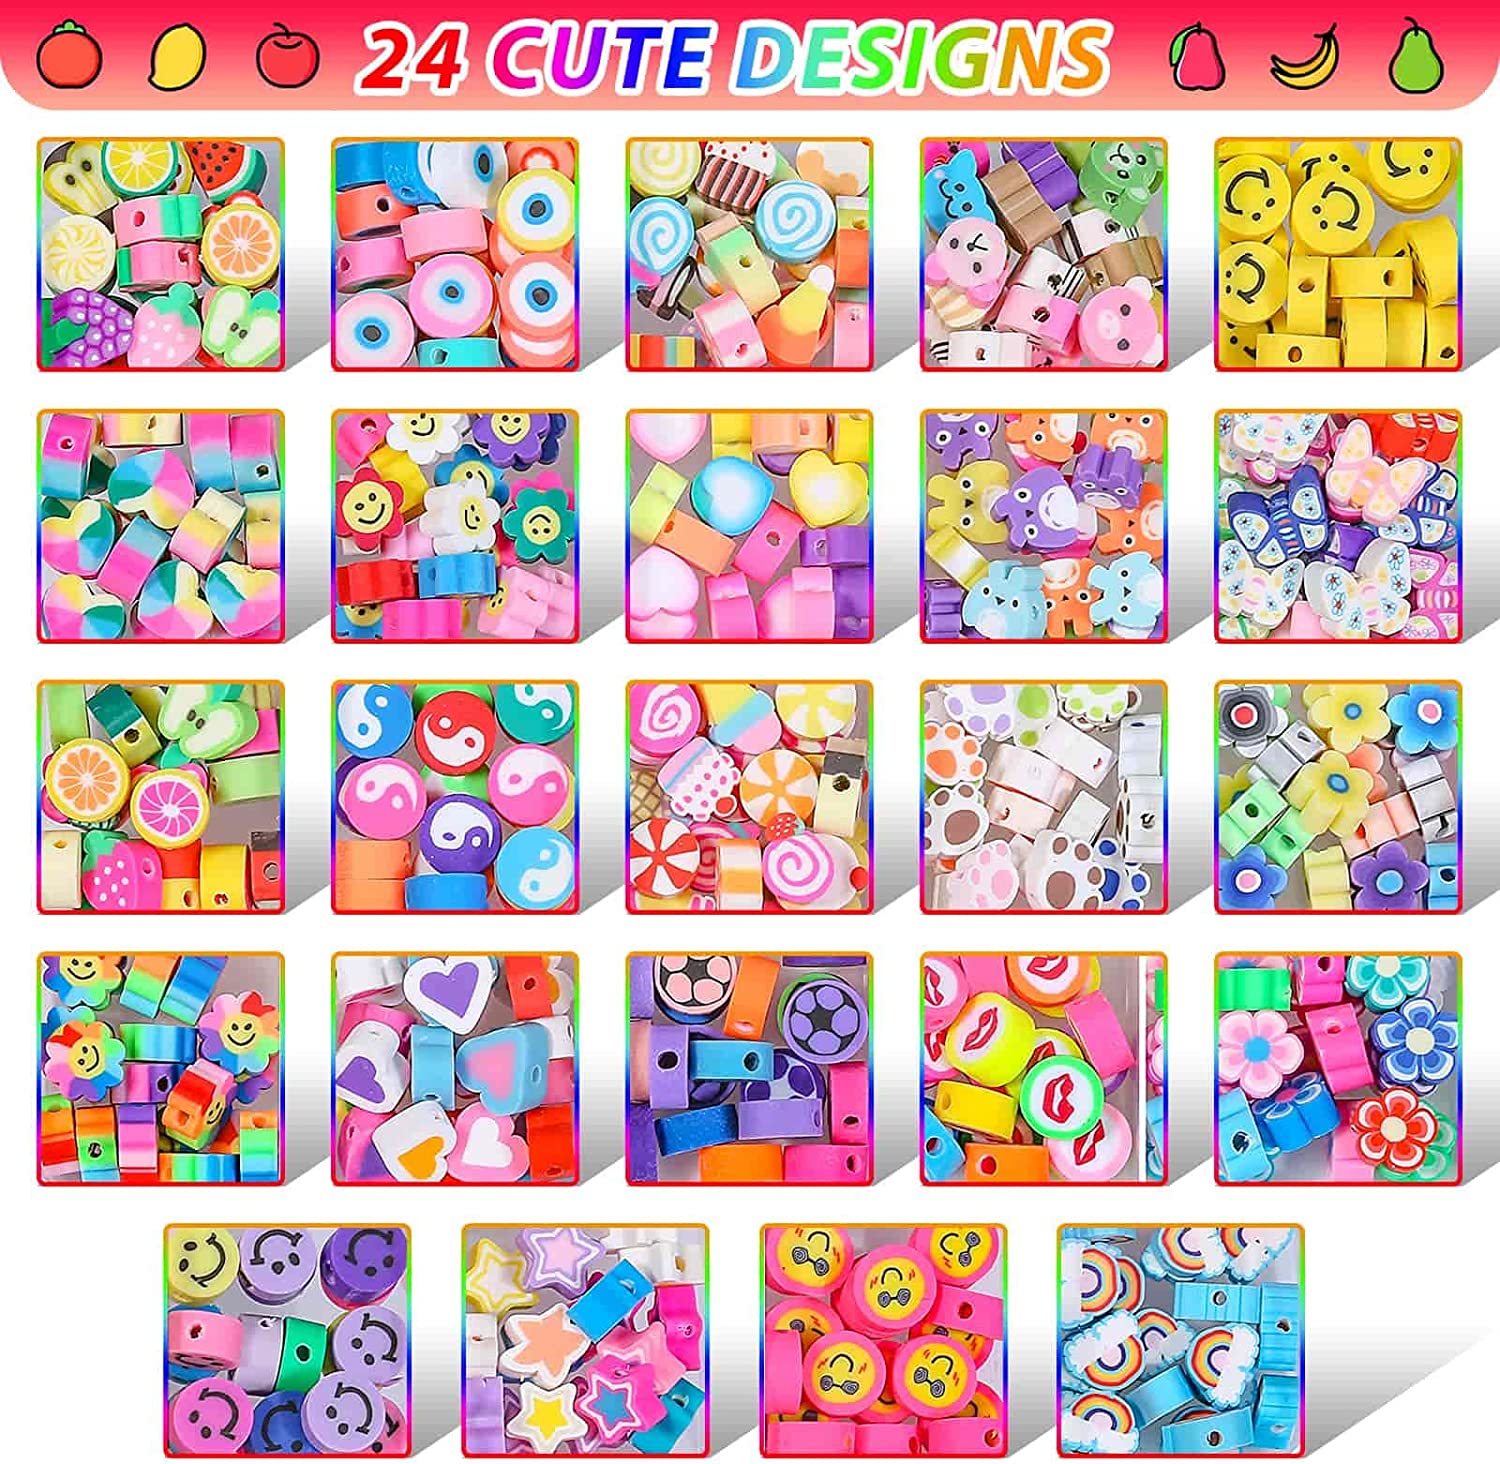 JOICEE 480PCS Fruit Flower Polymer Clay Beads, 24 Style Cute